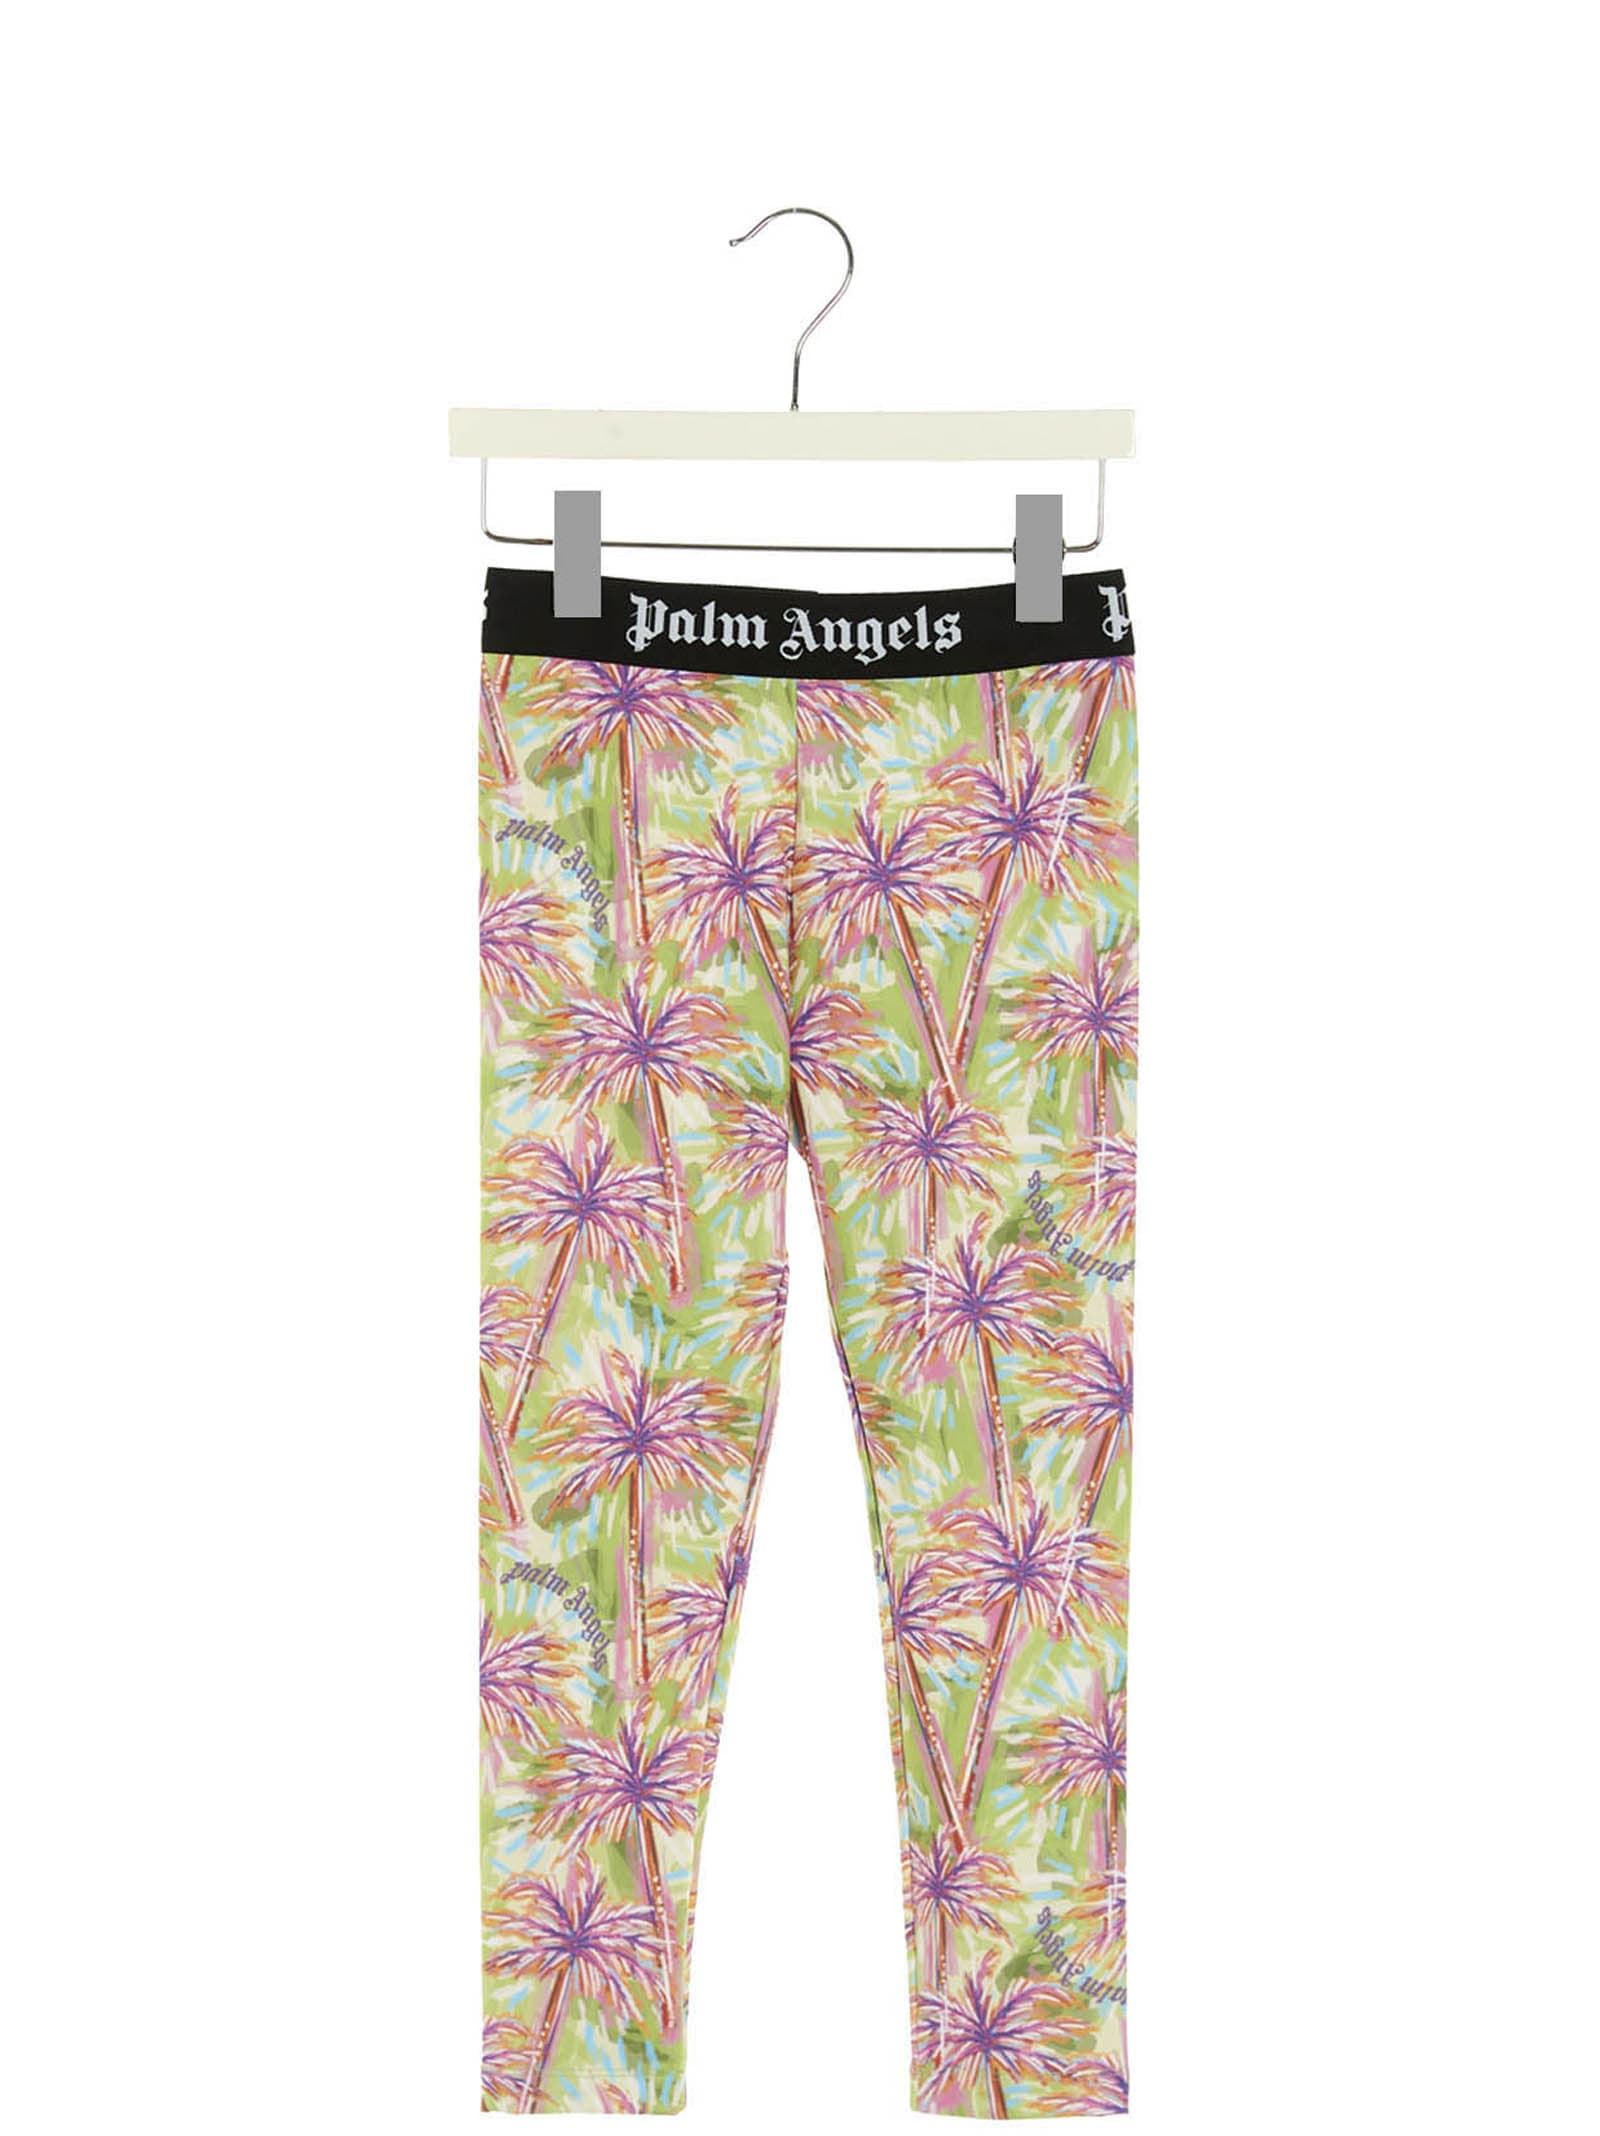 Palm Angels All-over Print Leggings